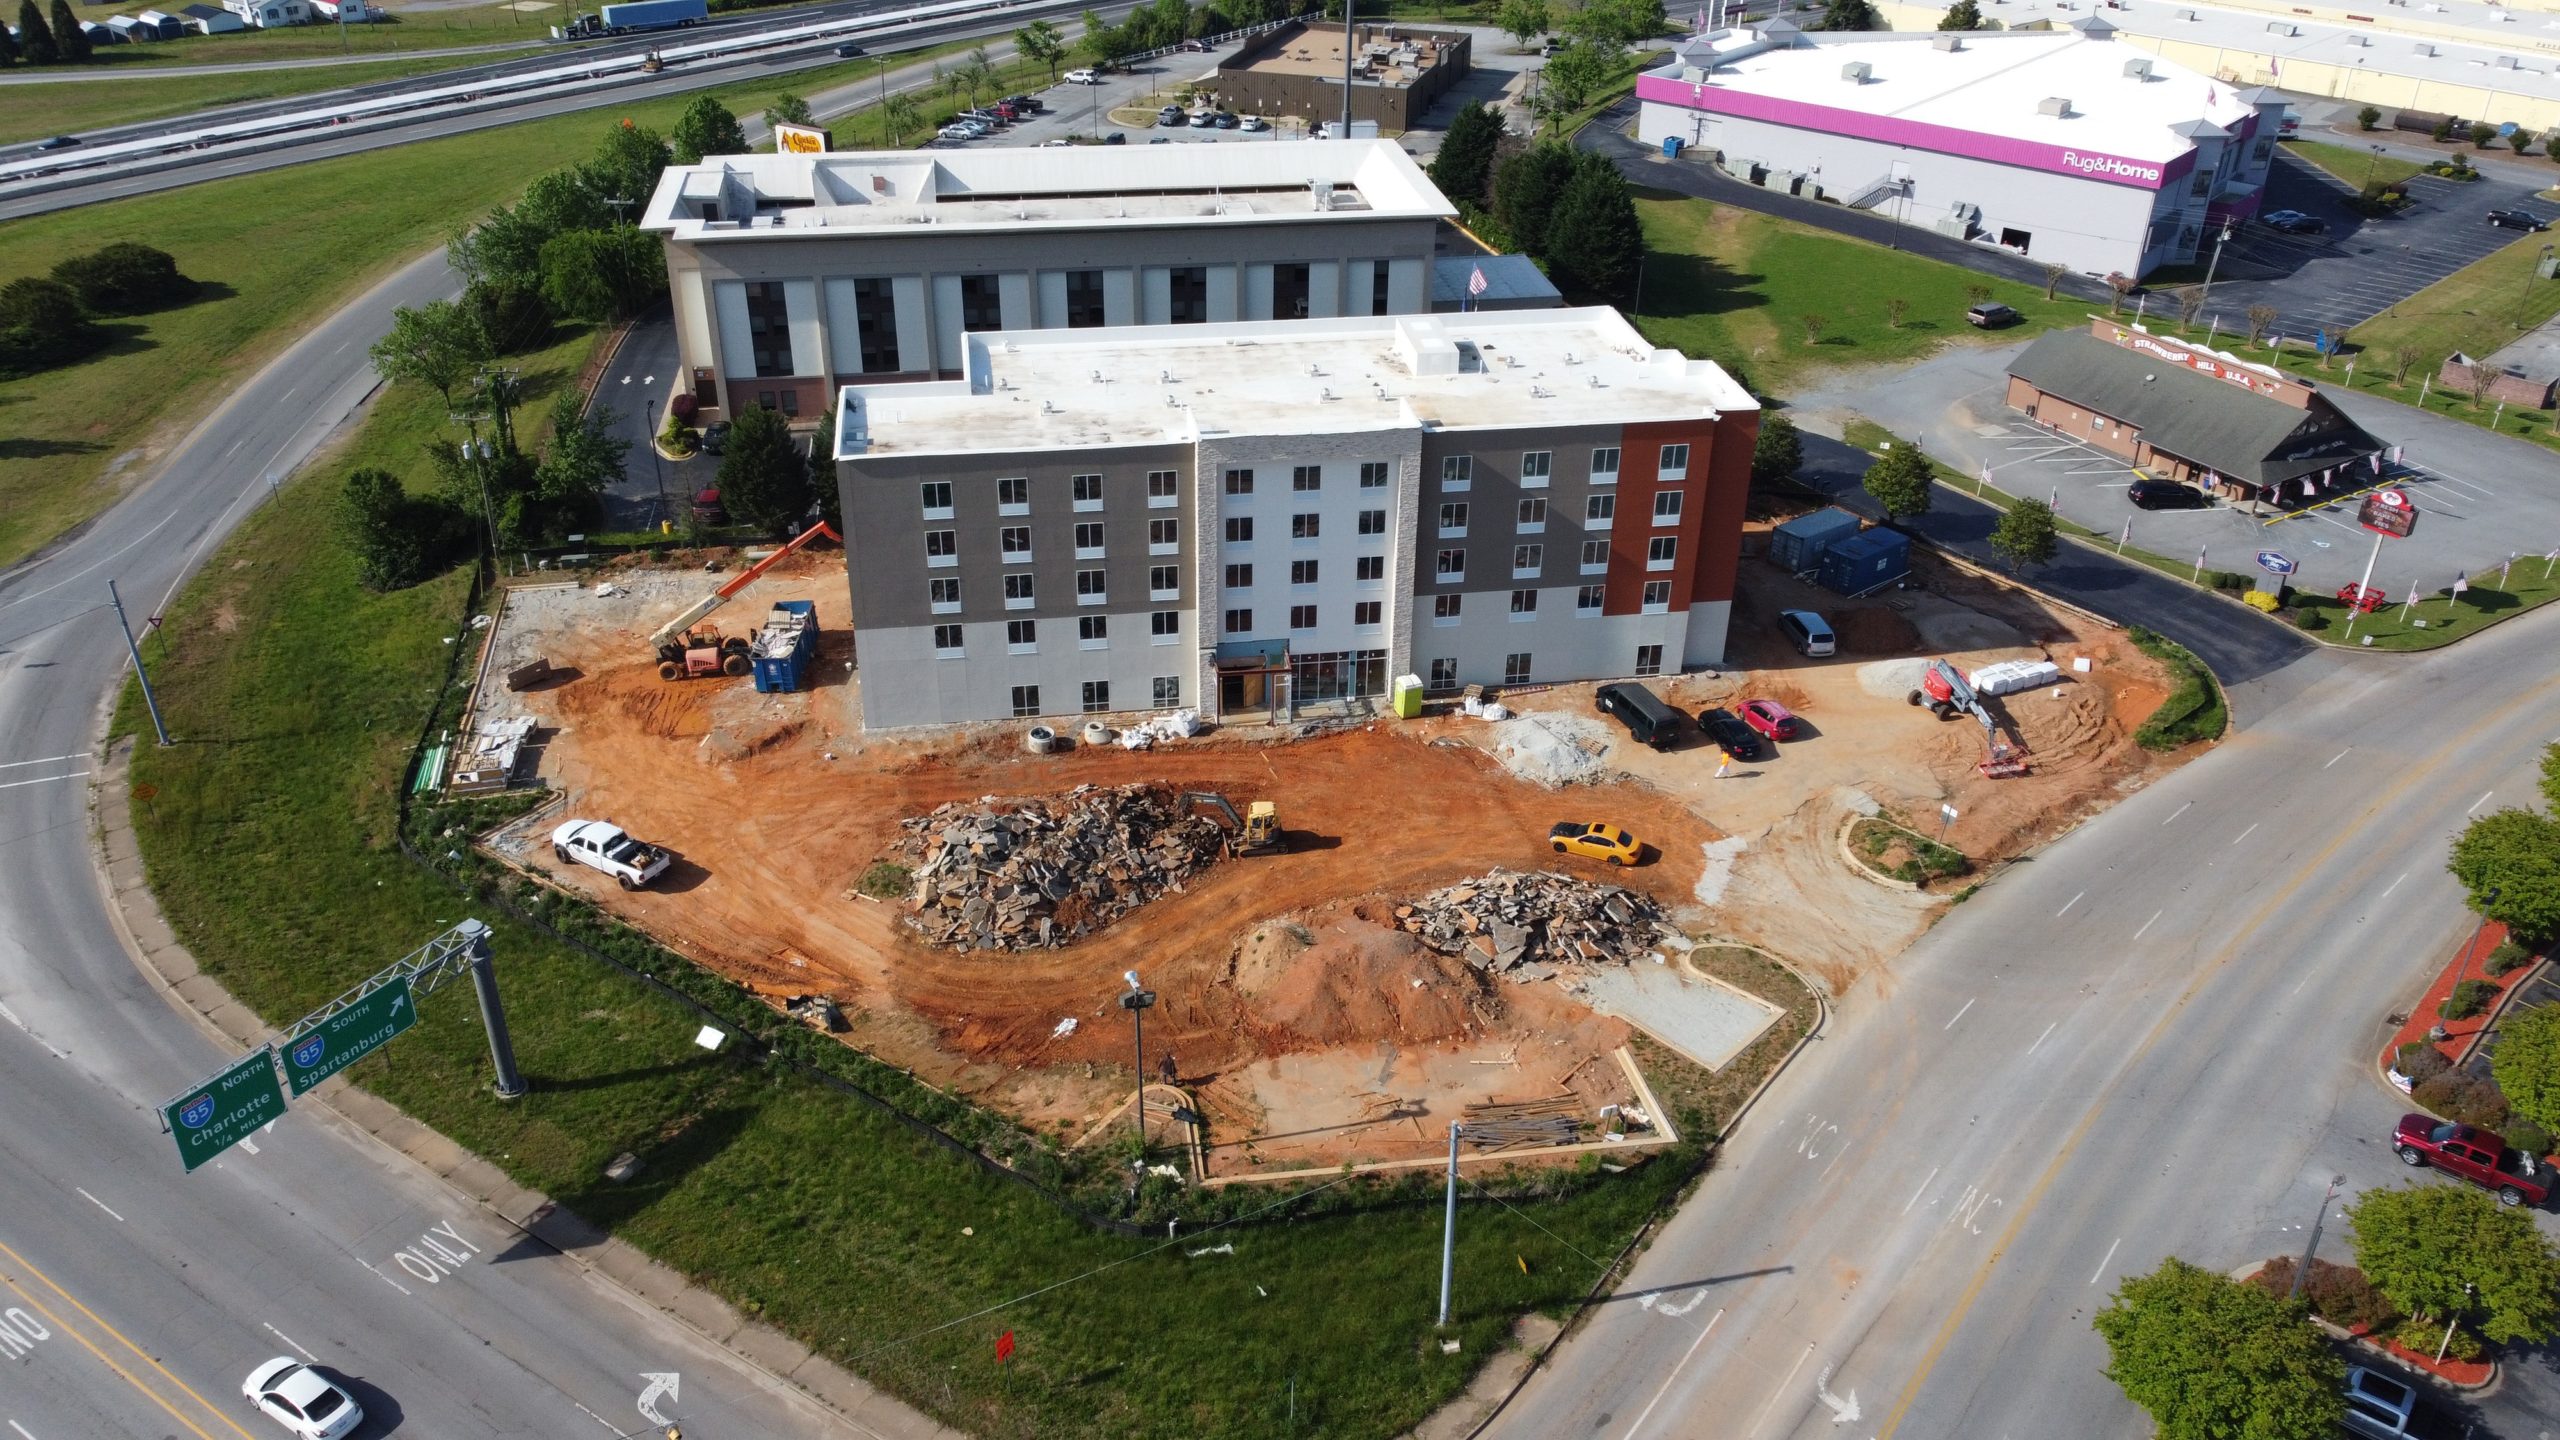 Marcus & Millichap Brokers the Sale of a Newly Built Hotel in Gaffney